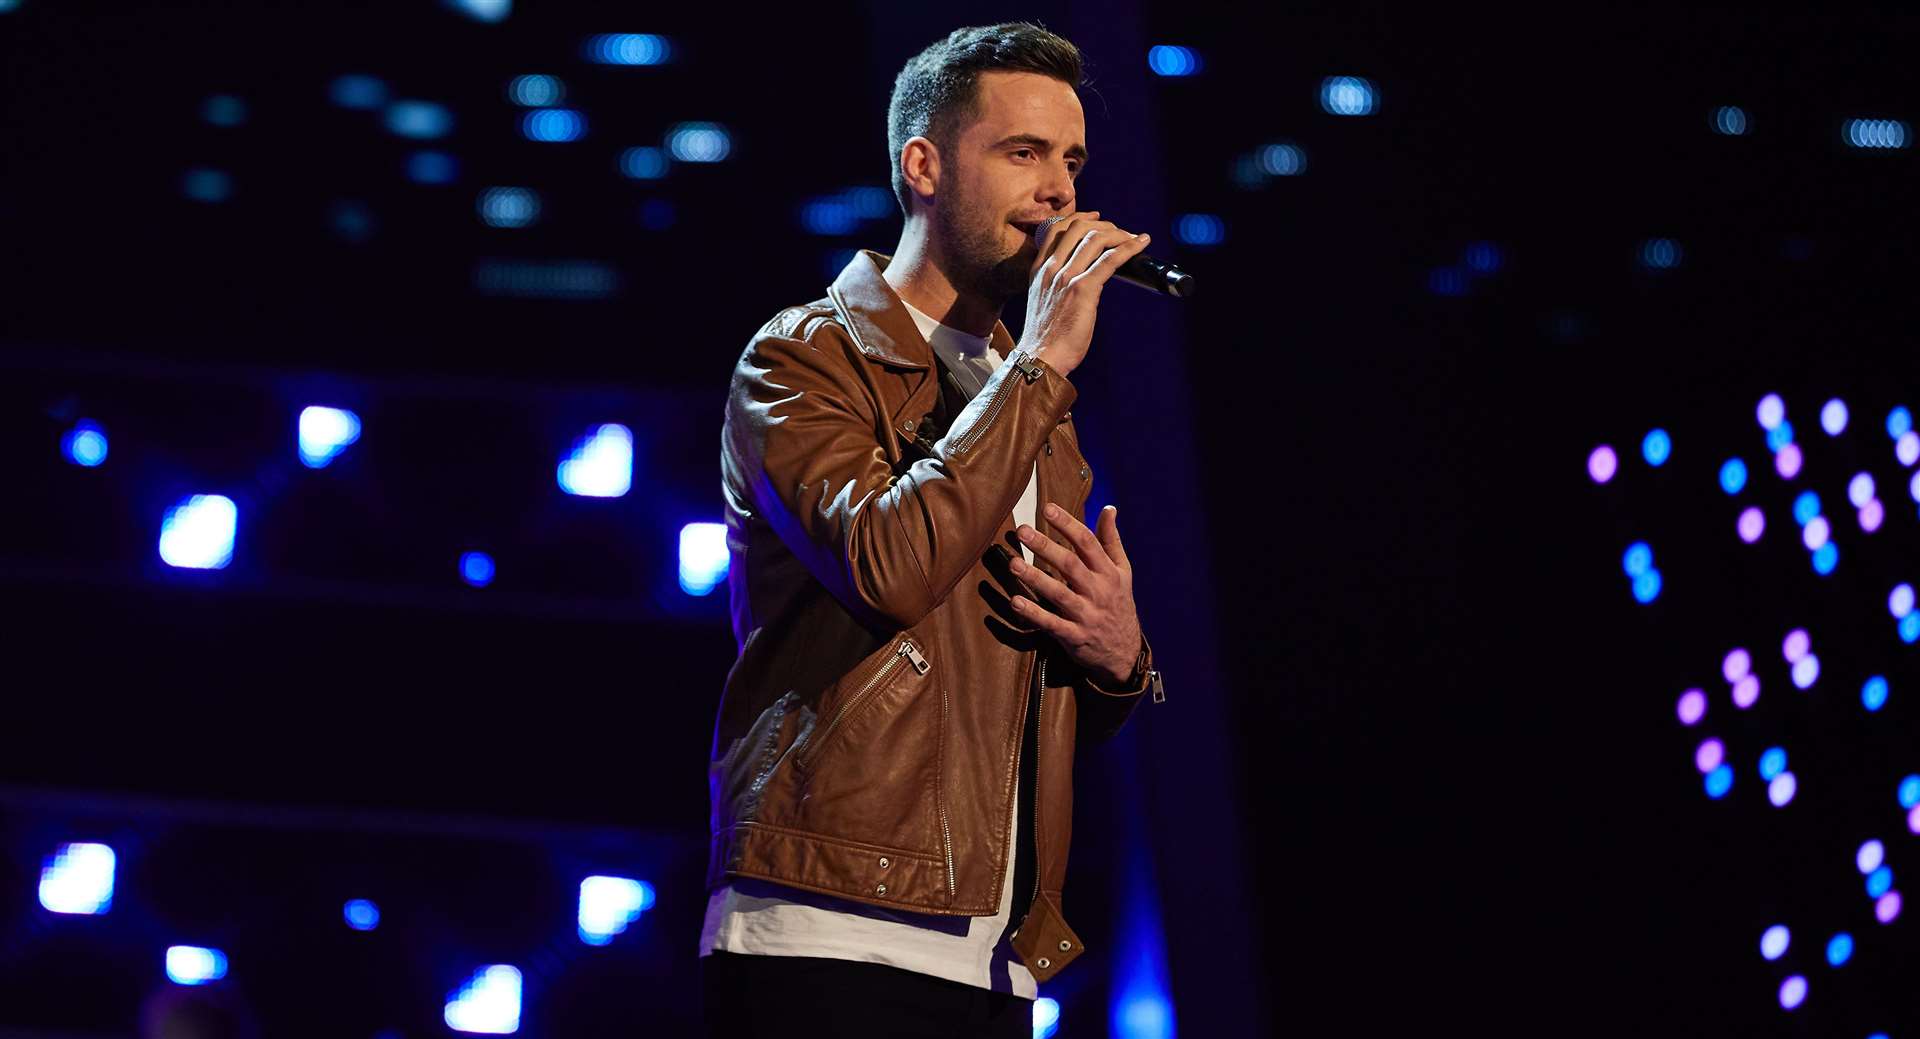 ITV's The Voice semifinal will feature Andrew Bateup from Tunbridge